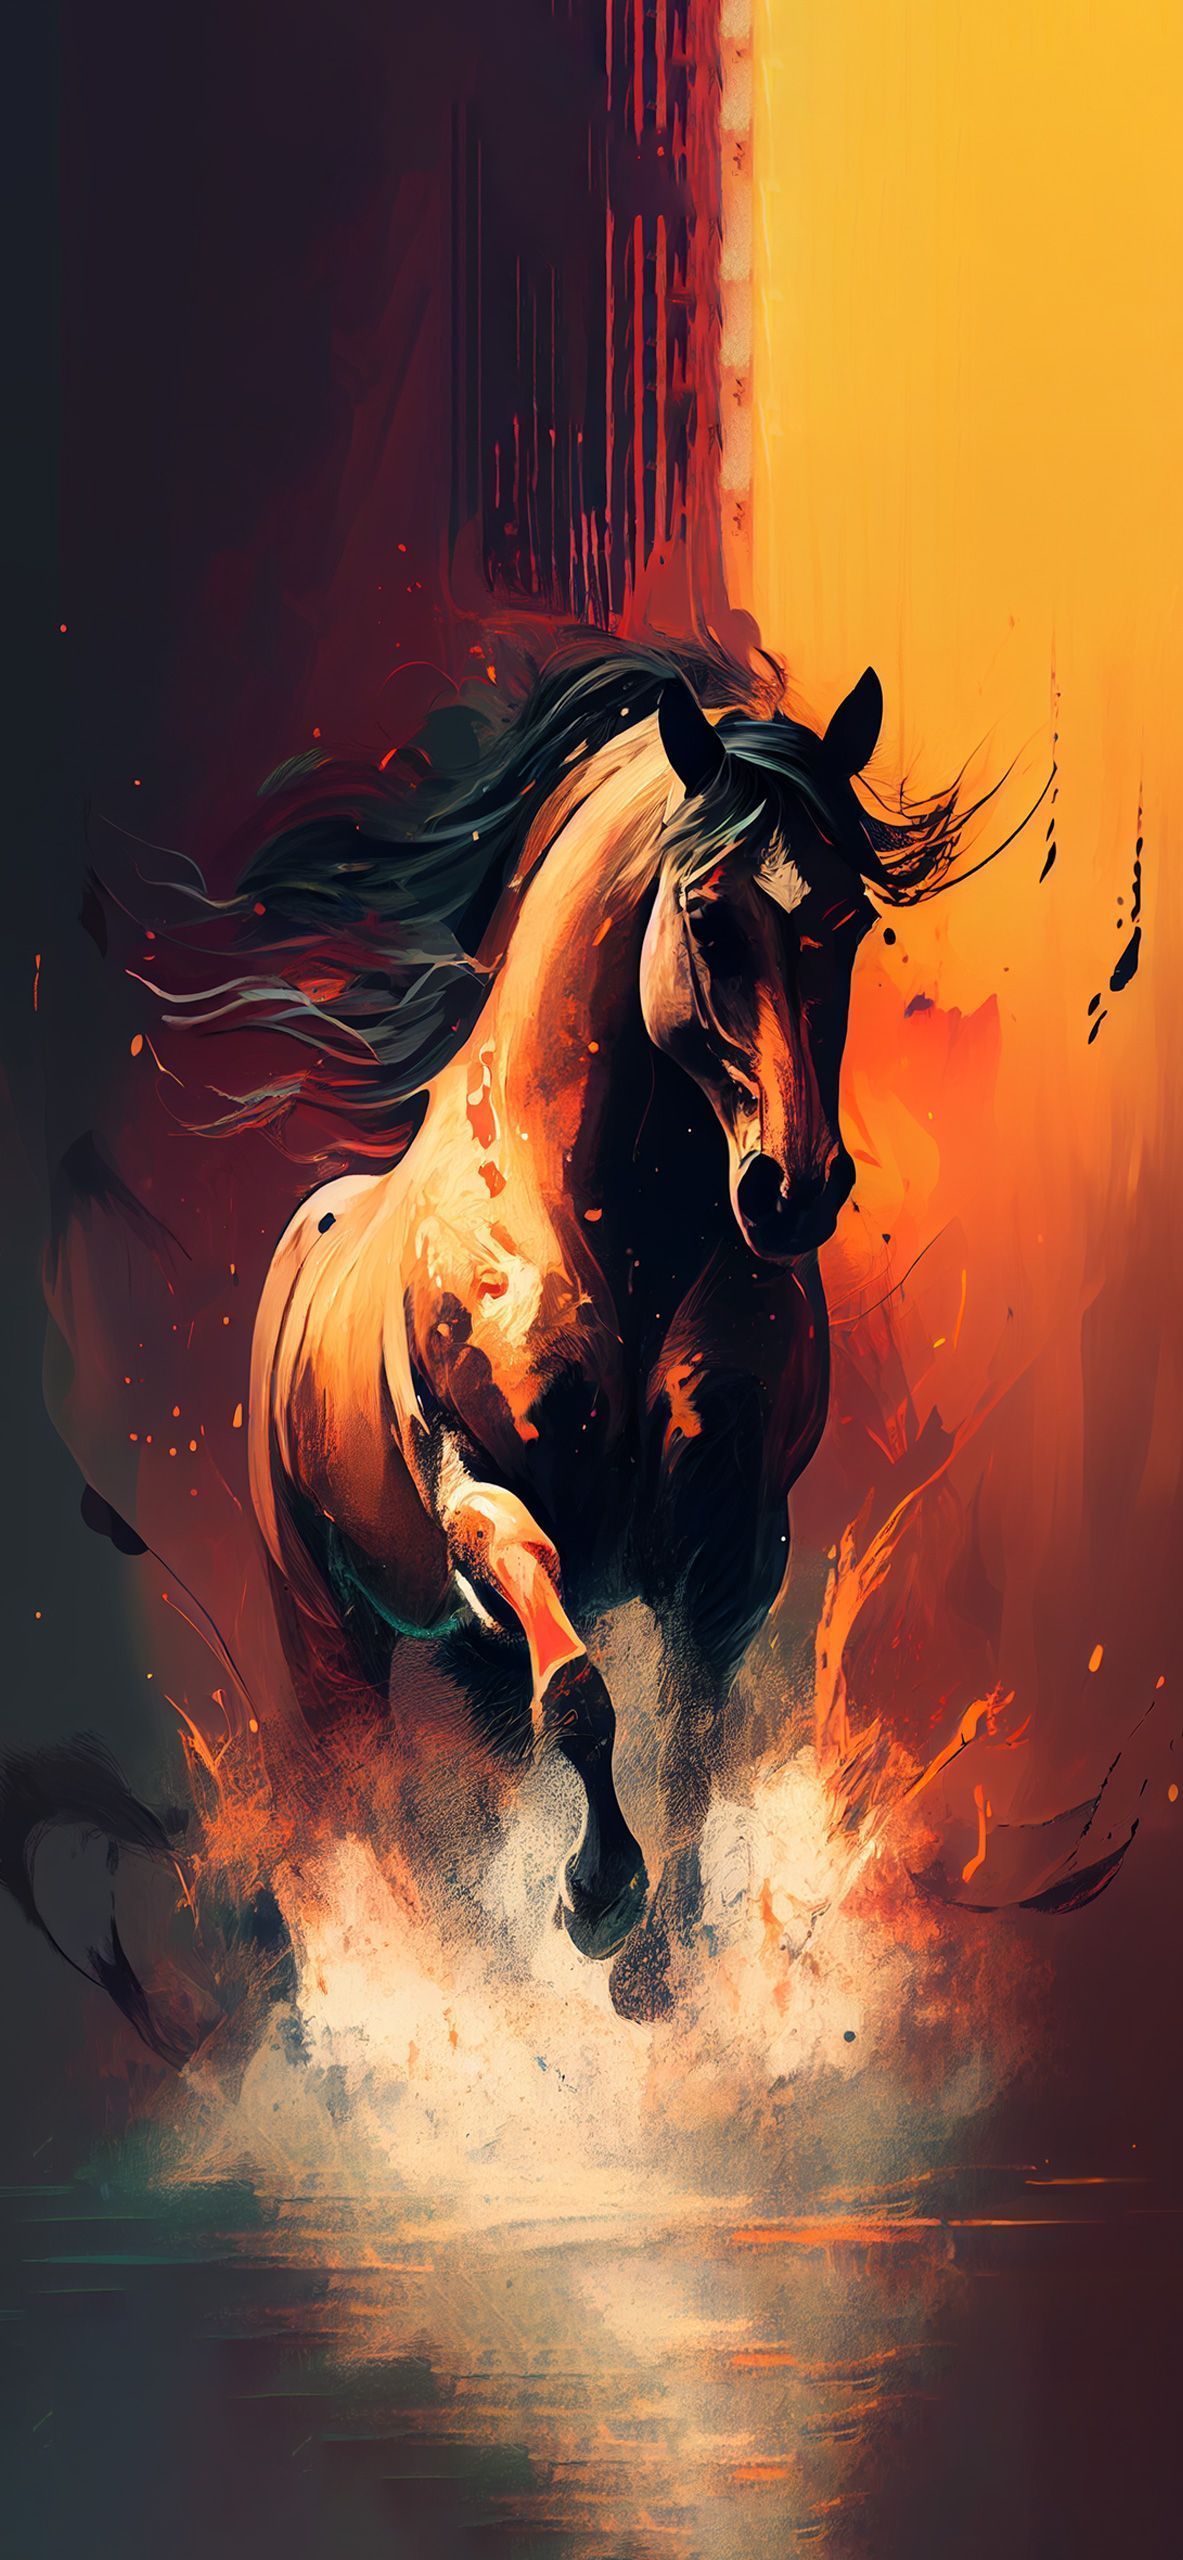 A horse runs through a fiery landscape in this digital painting. - Horse